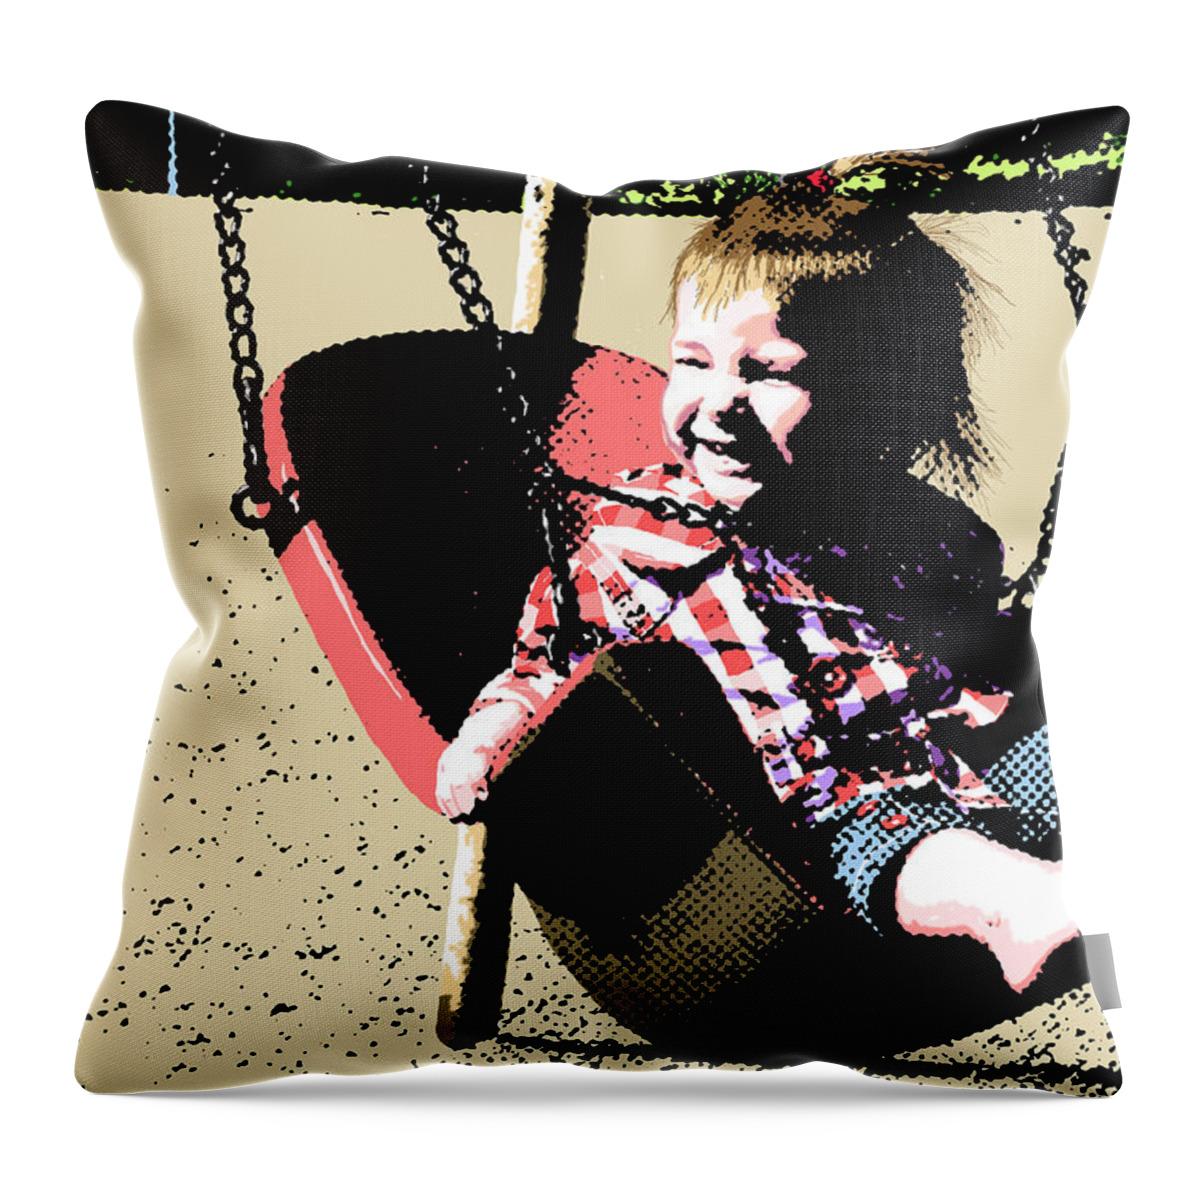 Outdoors Throw Pillow featuring the digital art What Fun by Adam Vance